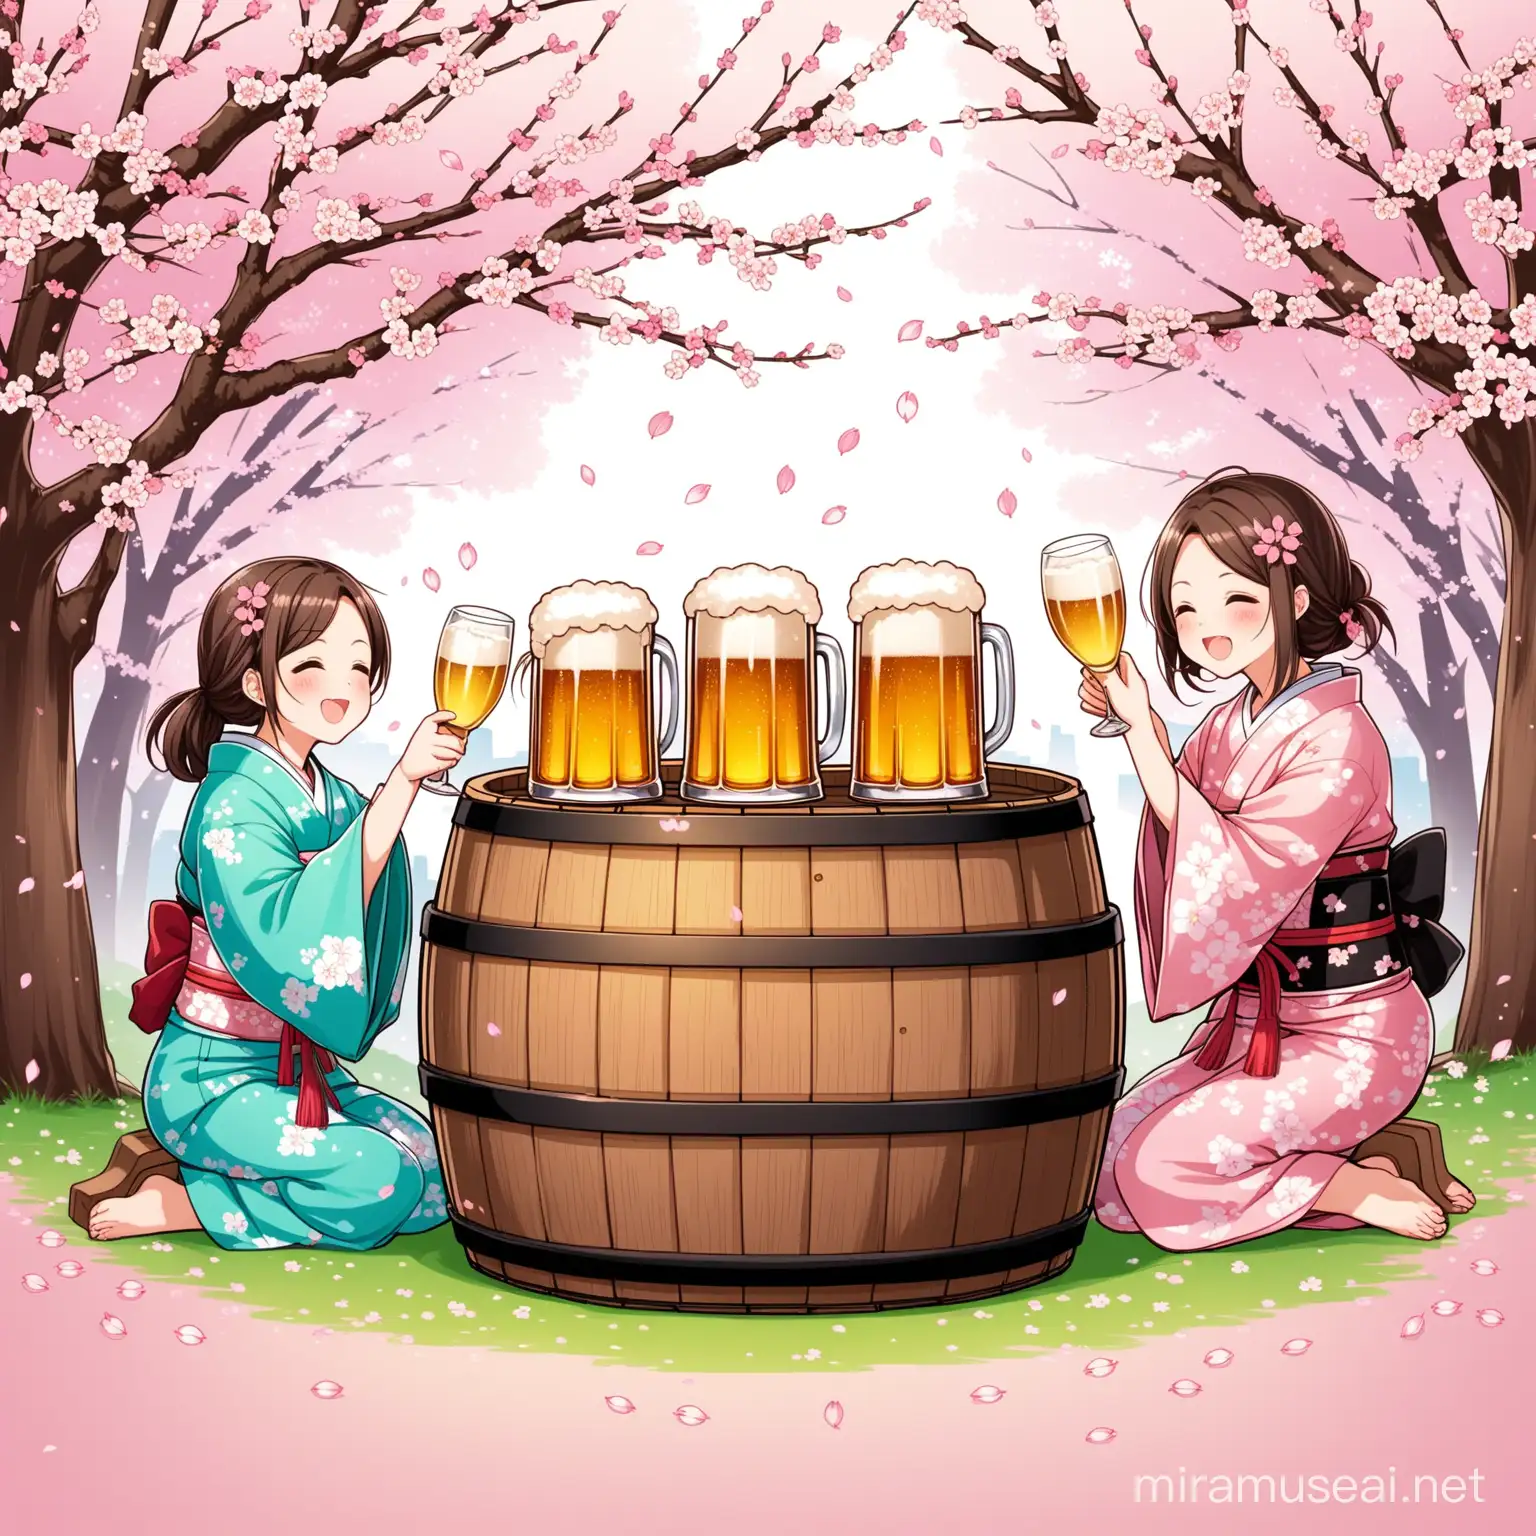 Please create a pictures which represents the japanese word "hanami", also add one barrel of beer and two people clink glasses
